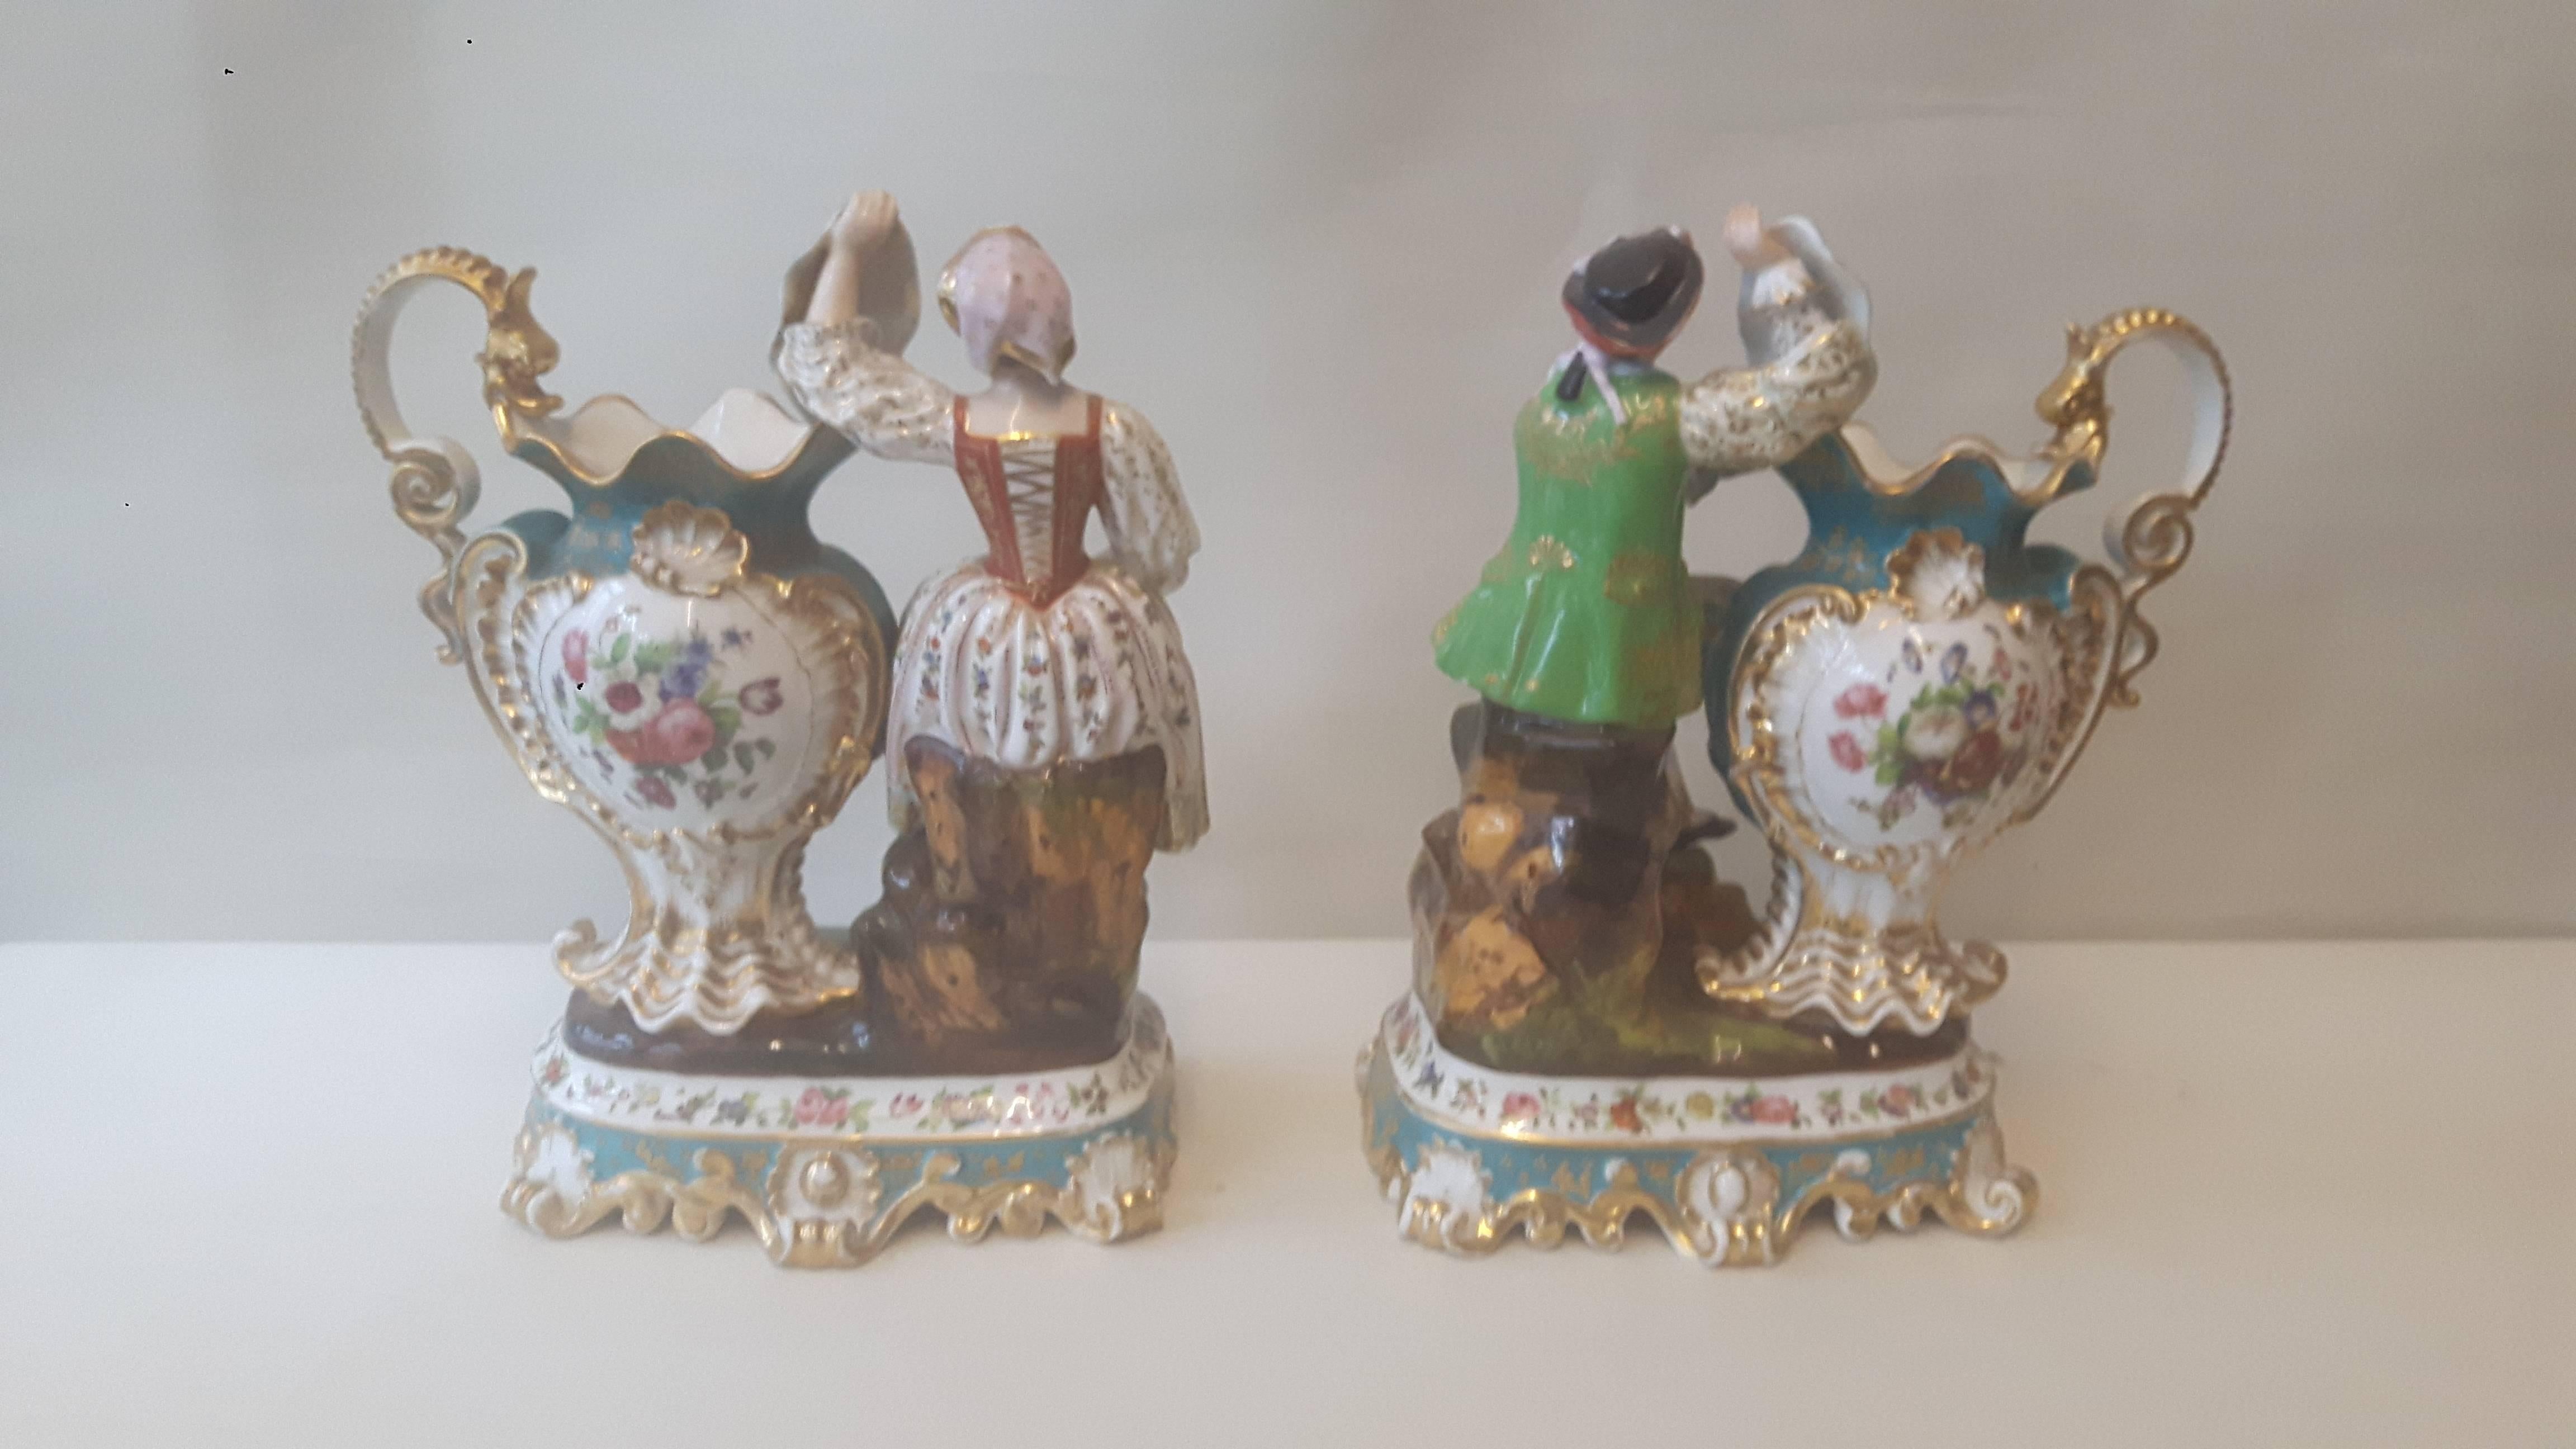 Glazed Pair of 19th Century French Figurines by Jacob Petit